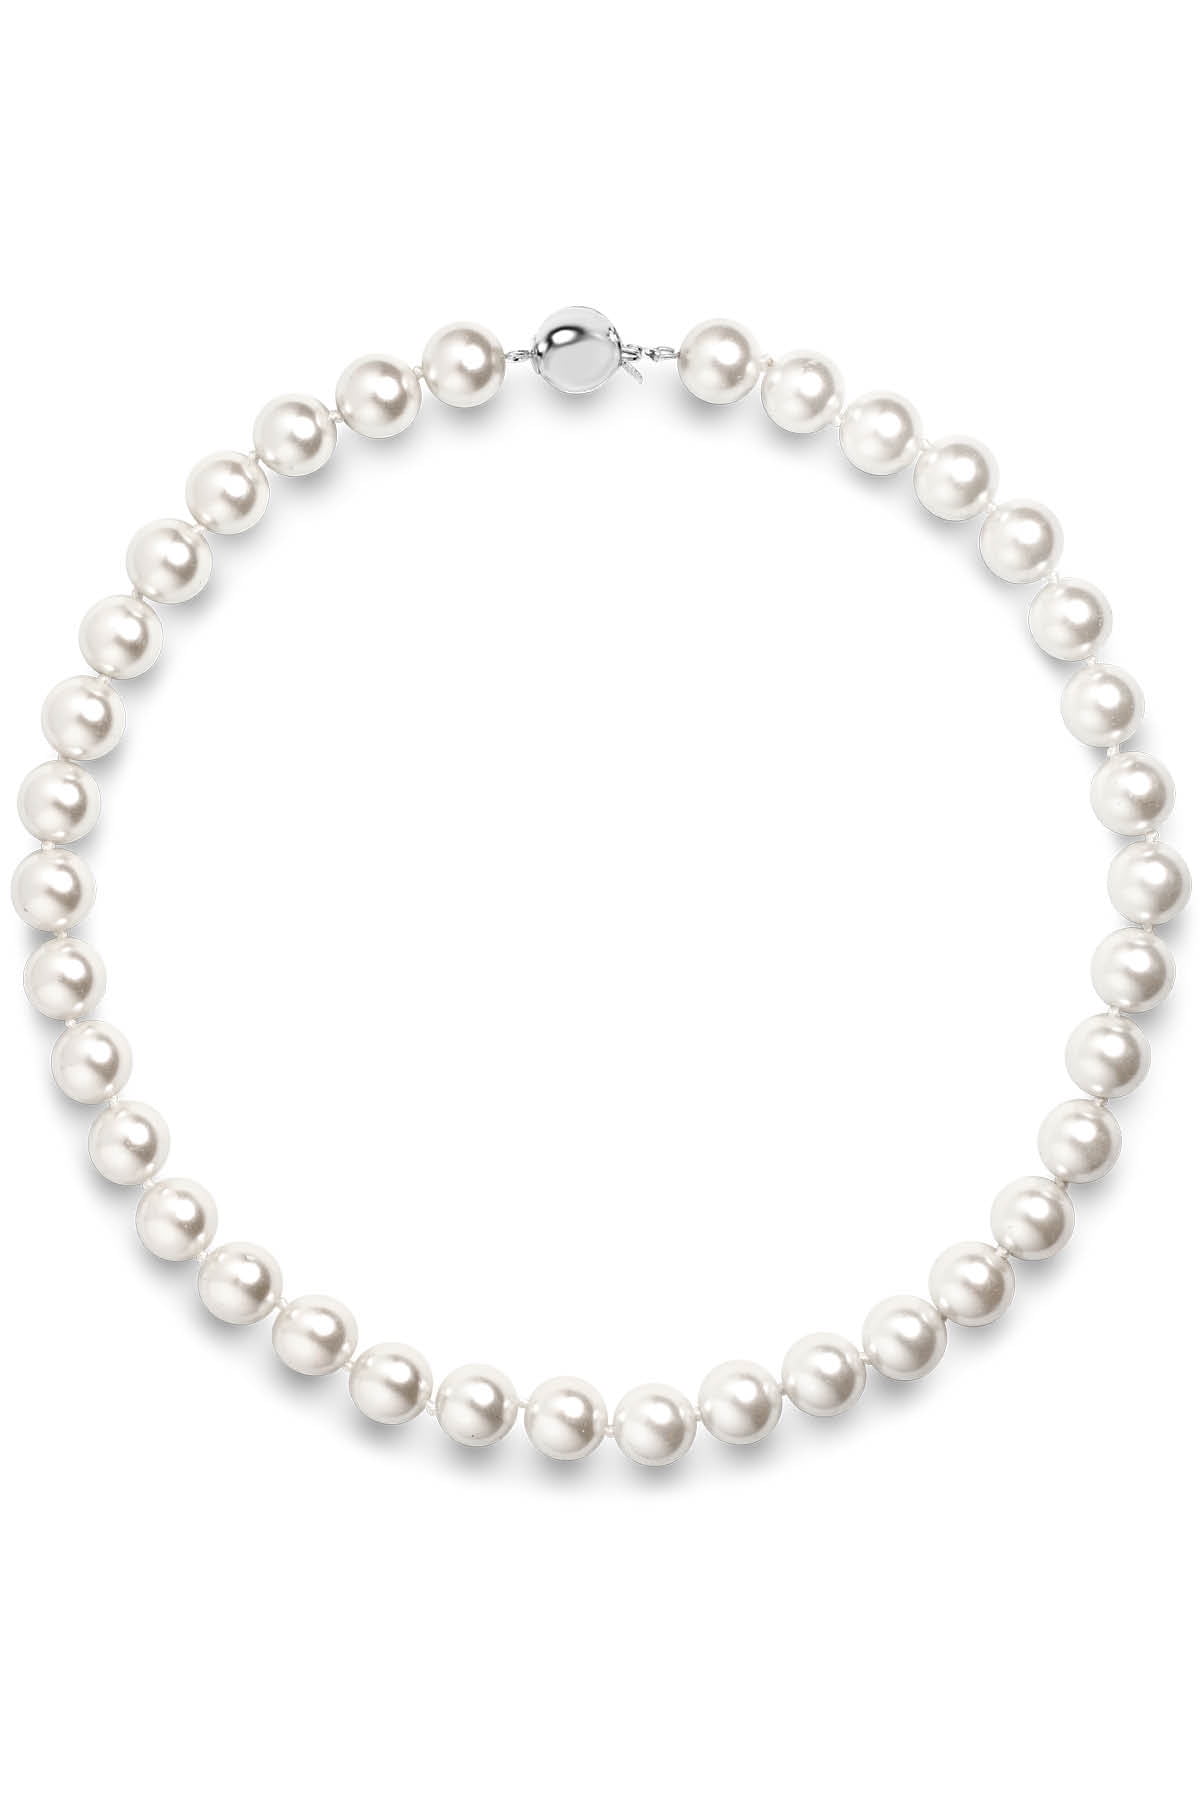 KEZEF Faux Pearl Necklace Cream White Simulated Pearls Necklace for ...